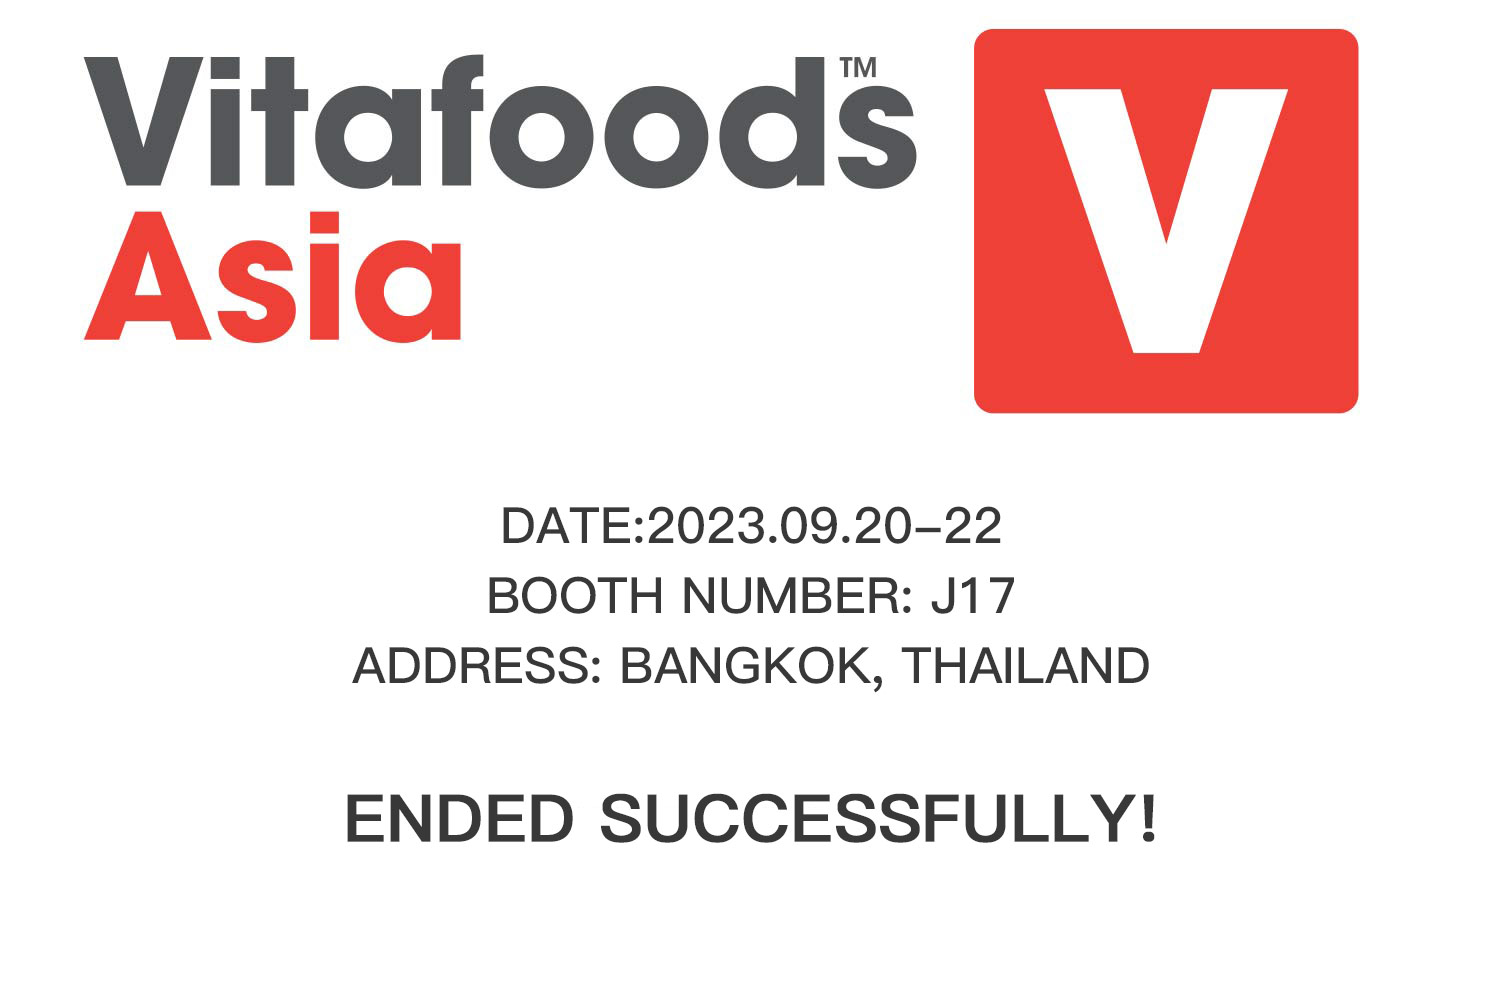 Vitafoods Asia Health Food and Raw Materials Exhibition (Vitafoods Asia) ended successfully!